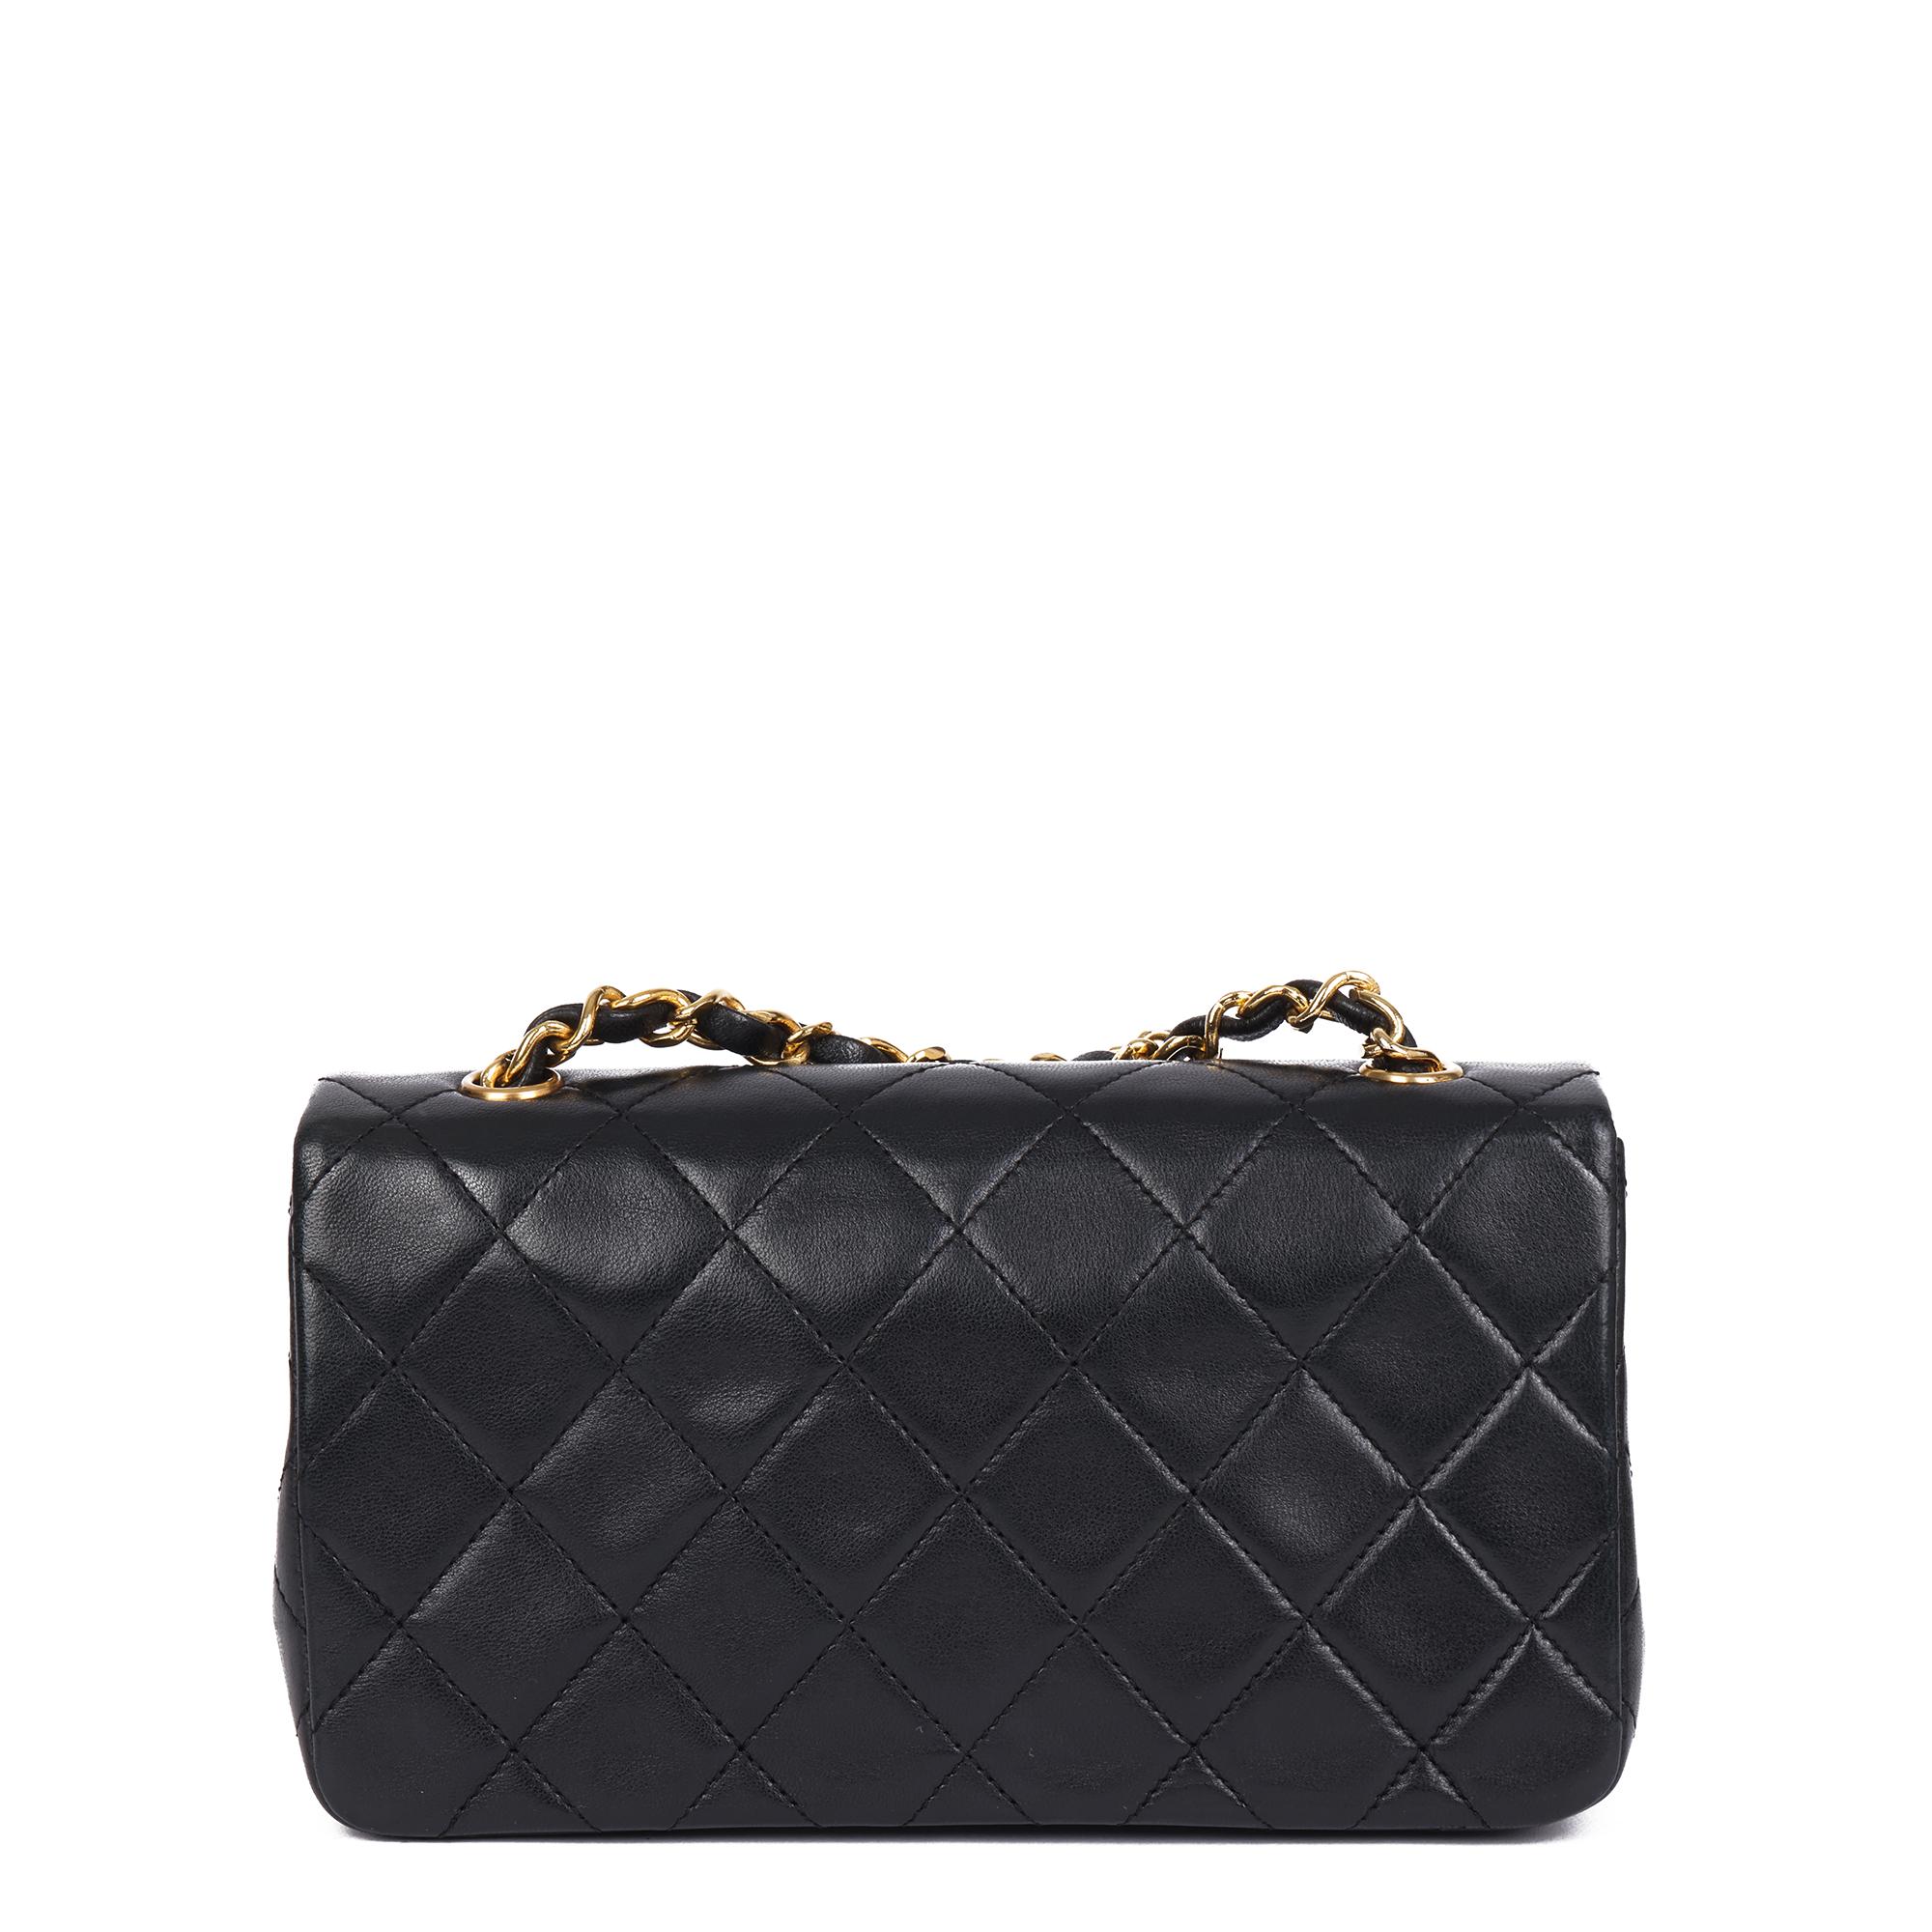 1991 Chanel Black Quilted Lambskin Vintage Mini Full Flap Bag 1